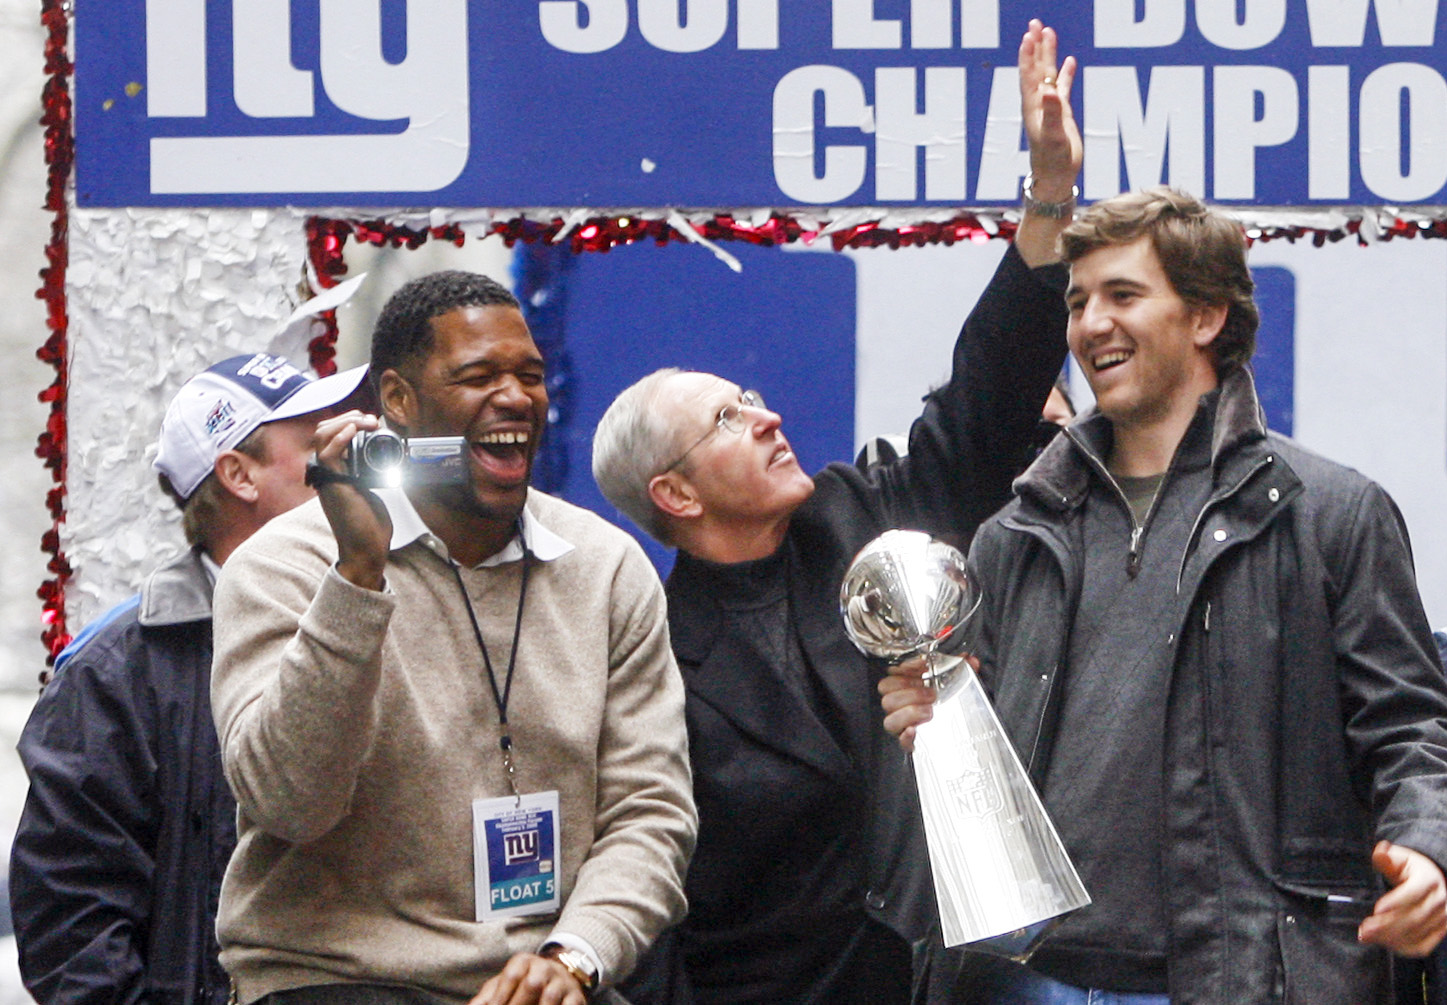 Michael Strahan (left) Coach Tom Coughlin, Eli Manning, Jerry Reese II and his father, Giants GM Jerry Reese celebrate with the Vince Lombardi Trophy as New York City celebrates the New York Giants win in Super Bowl XLII with a ticker tape parade up Broadway.  MANHATTAN, NYC (2008 file photo by Andrew Mills | The Star-Ledger)